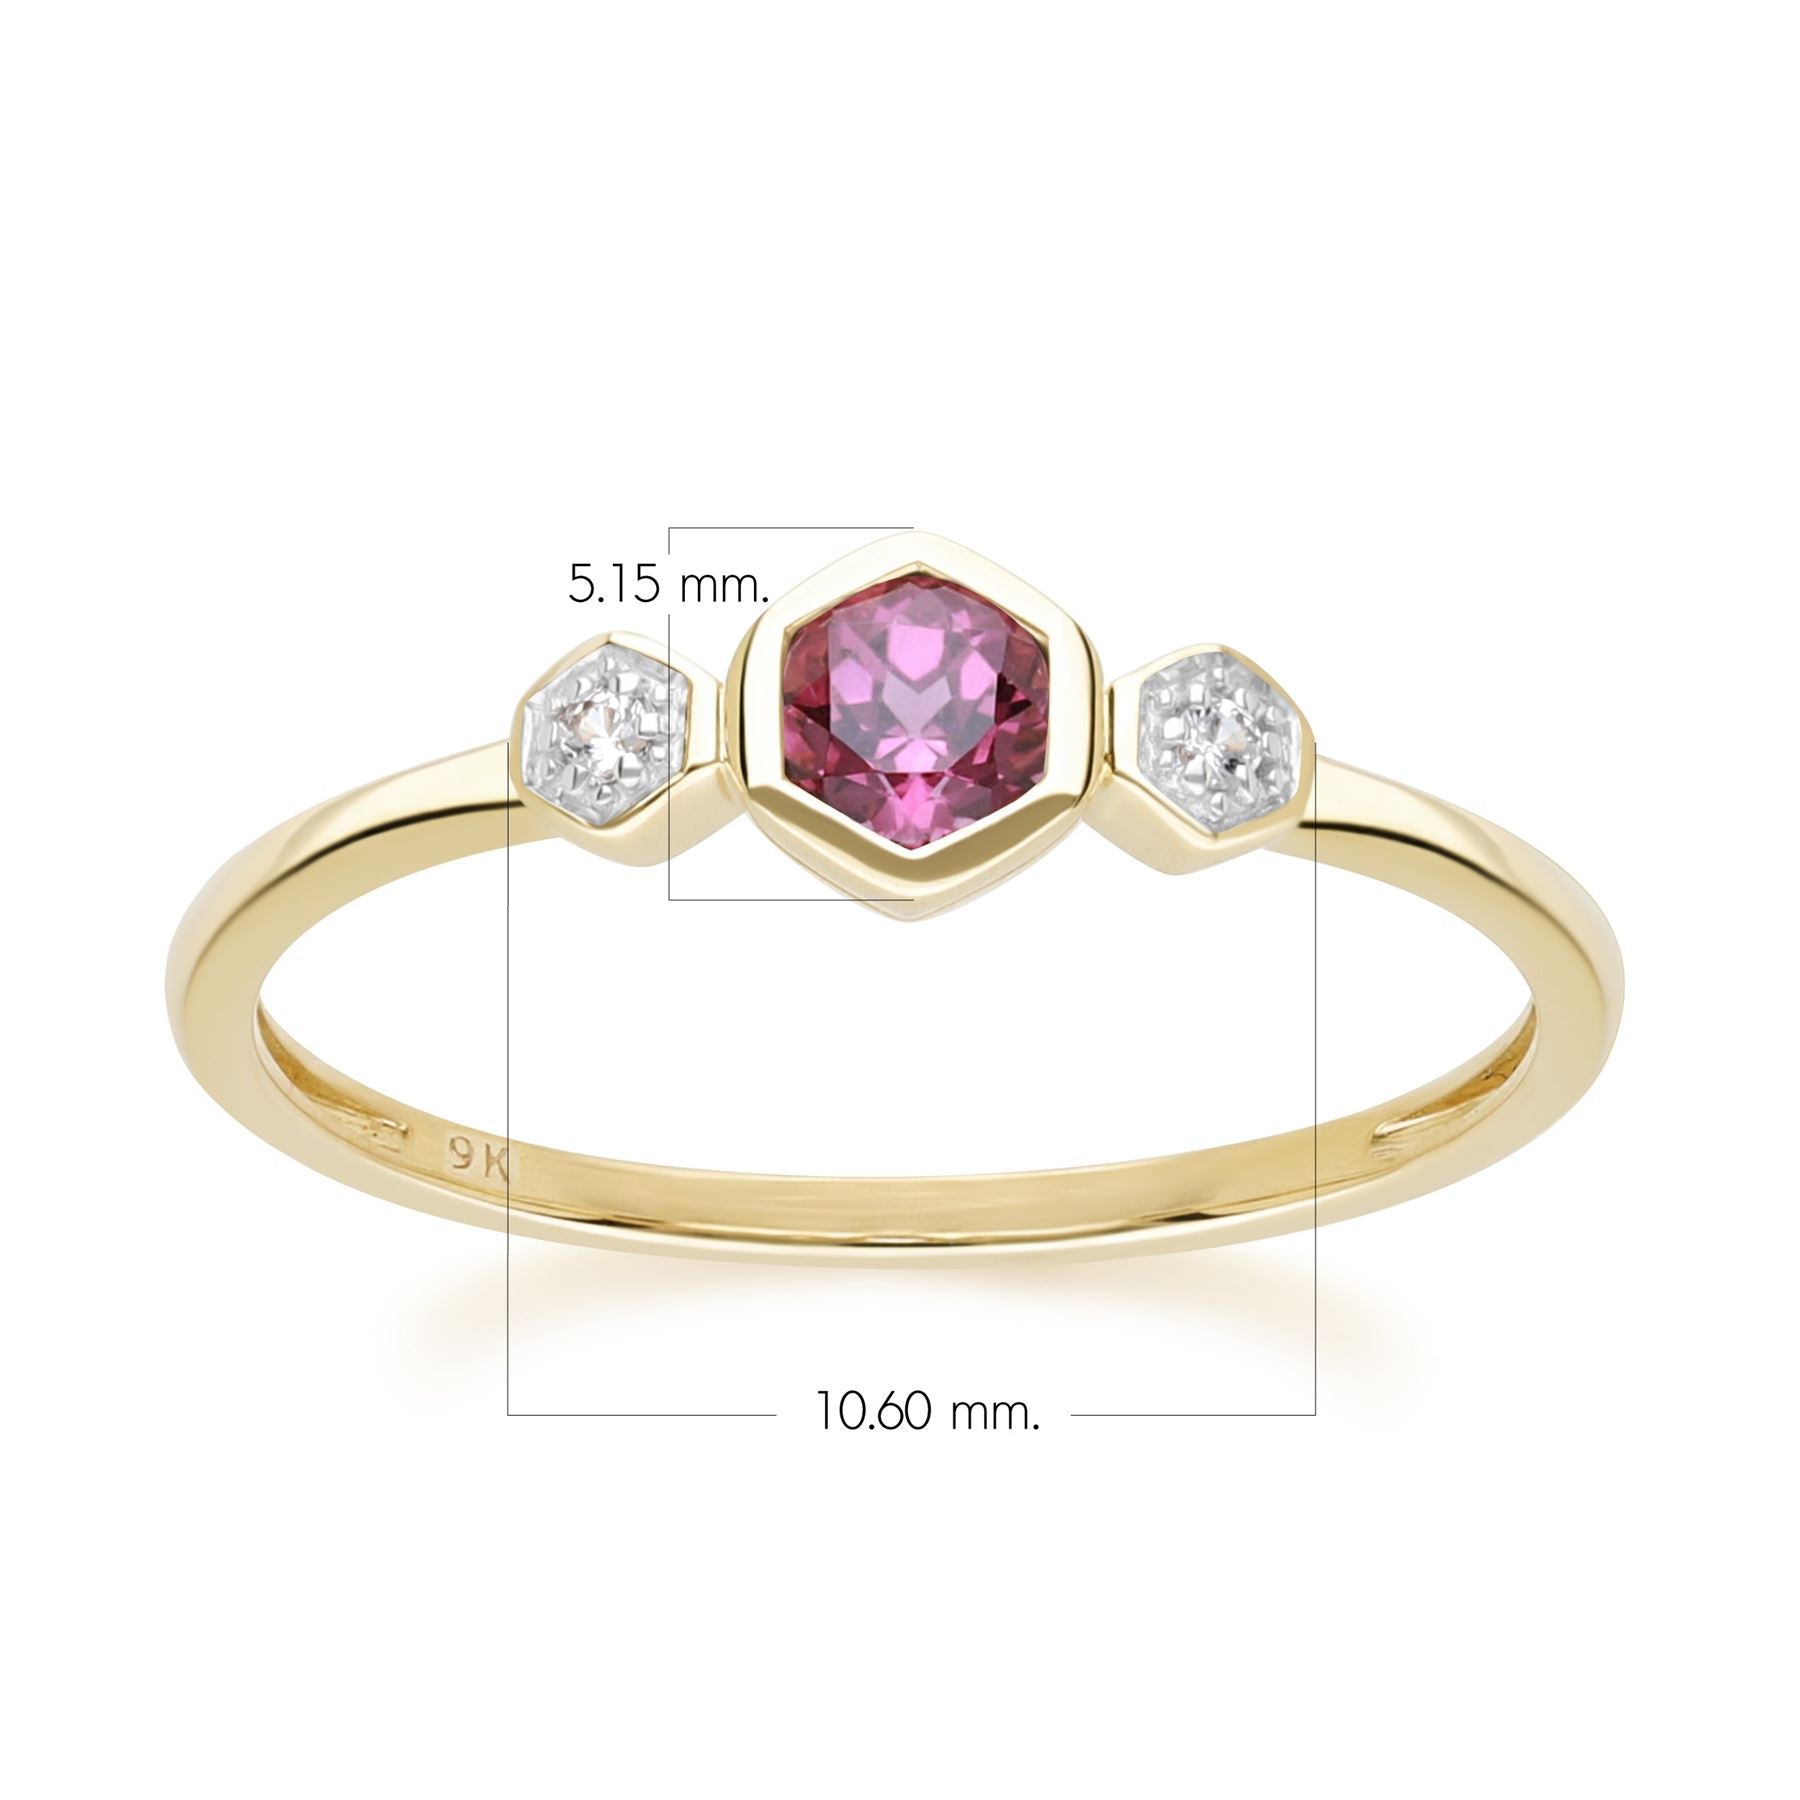 Geometric Round Rhodolite and Sapphire Ring in 9ct Yellow Gold Dimensions 